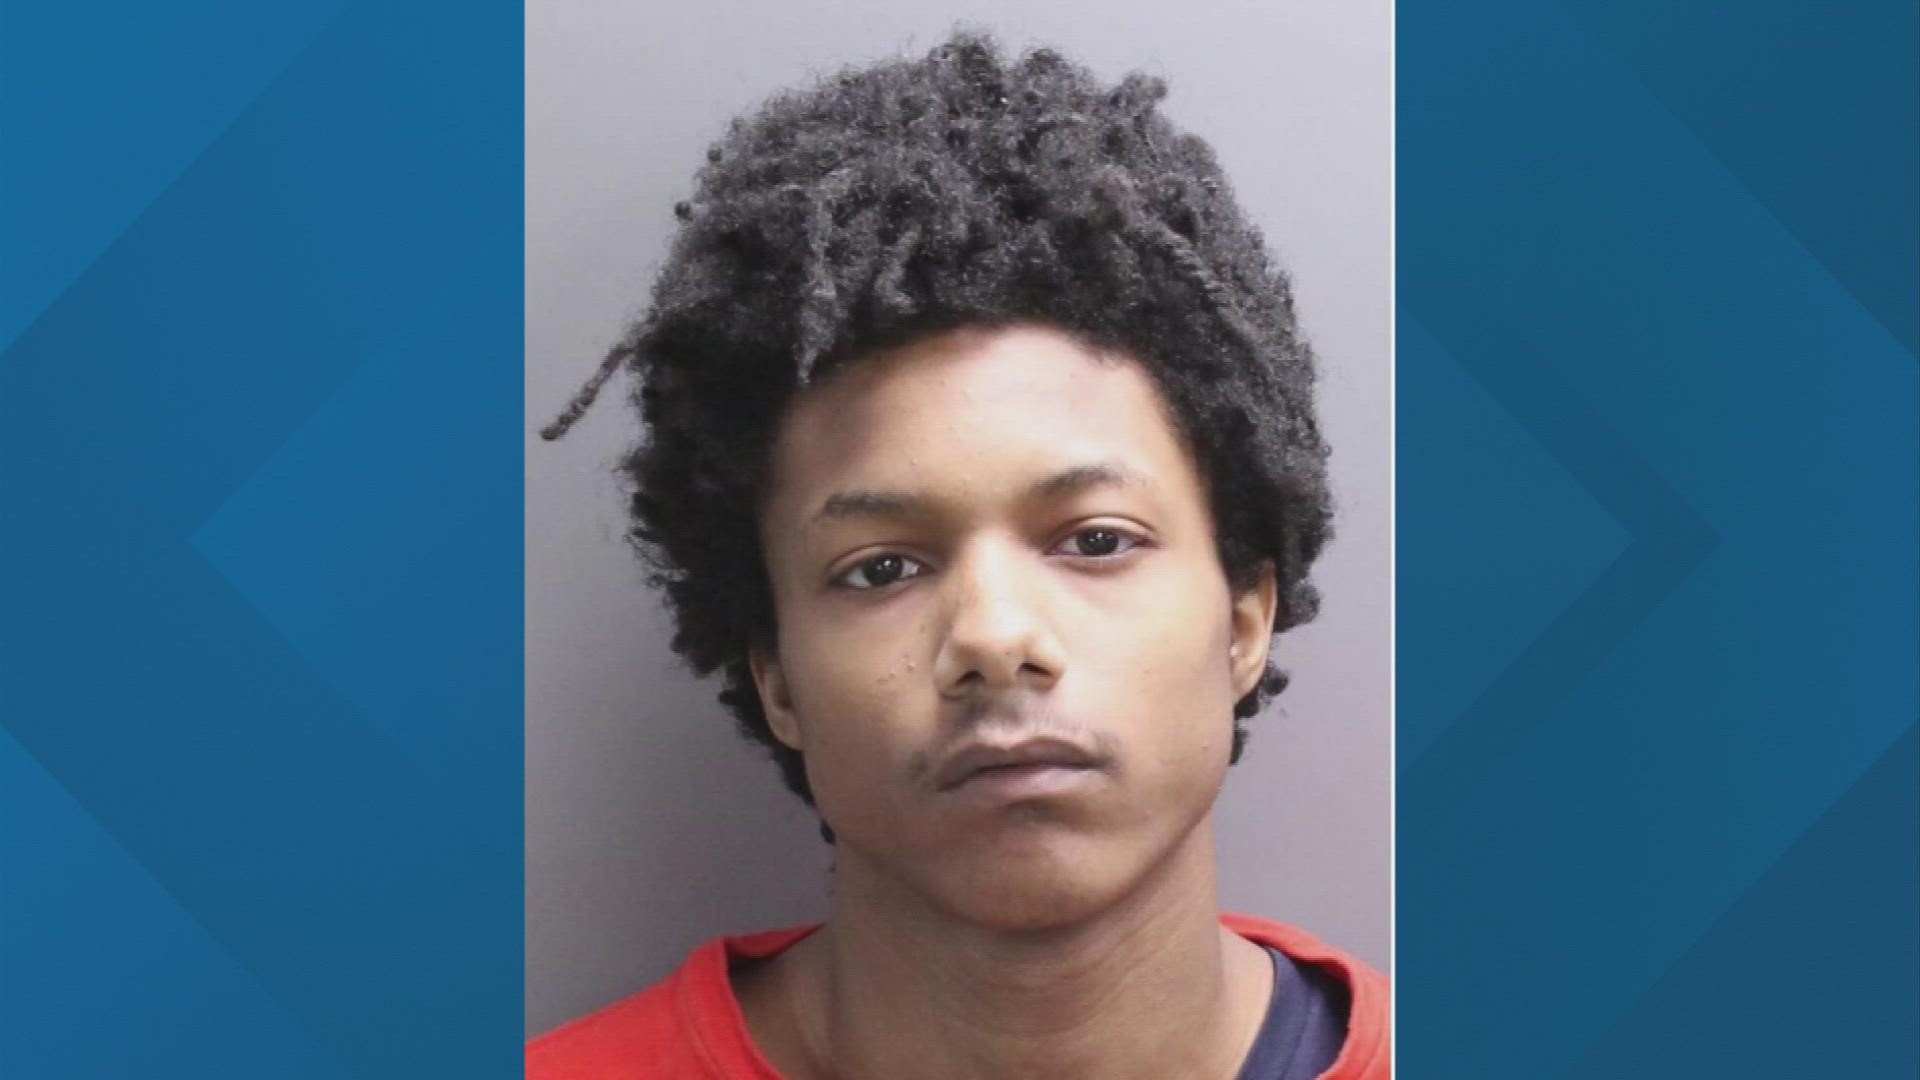 Davion Jones was arrested at his home this week and is charged with kidnapping.